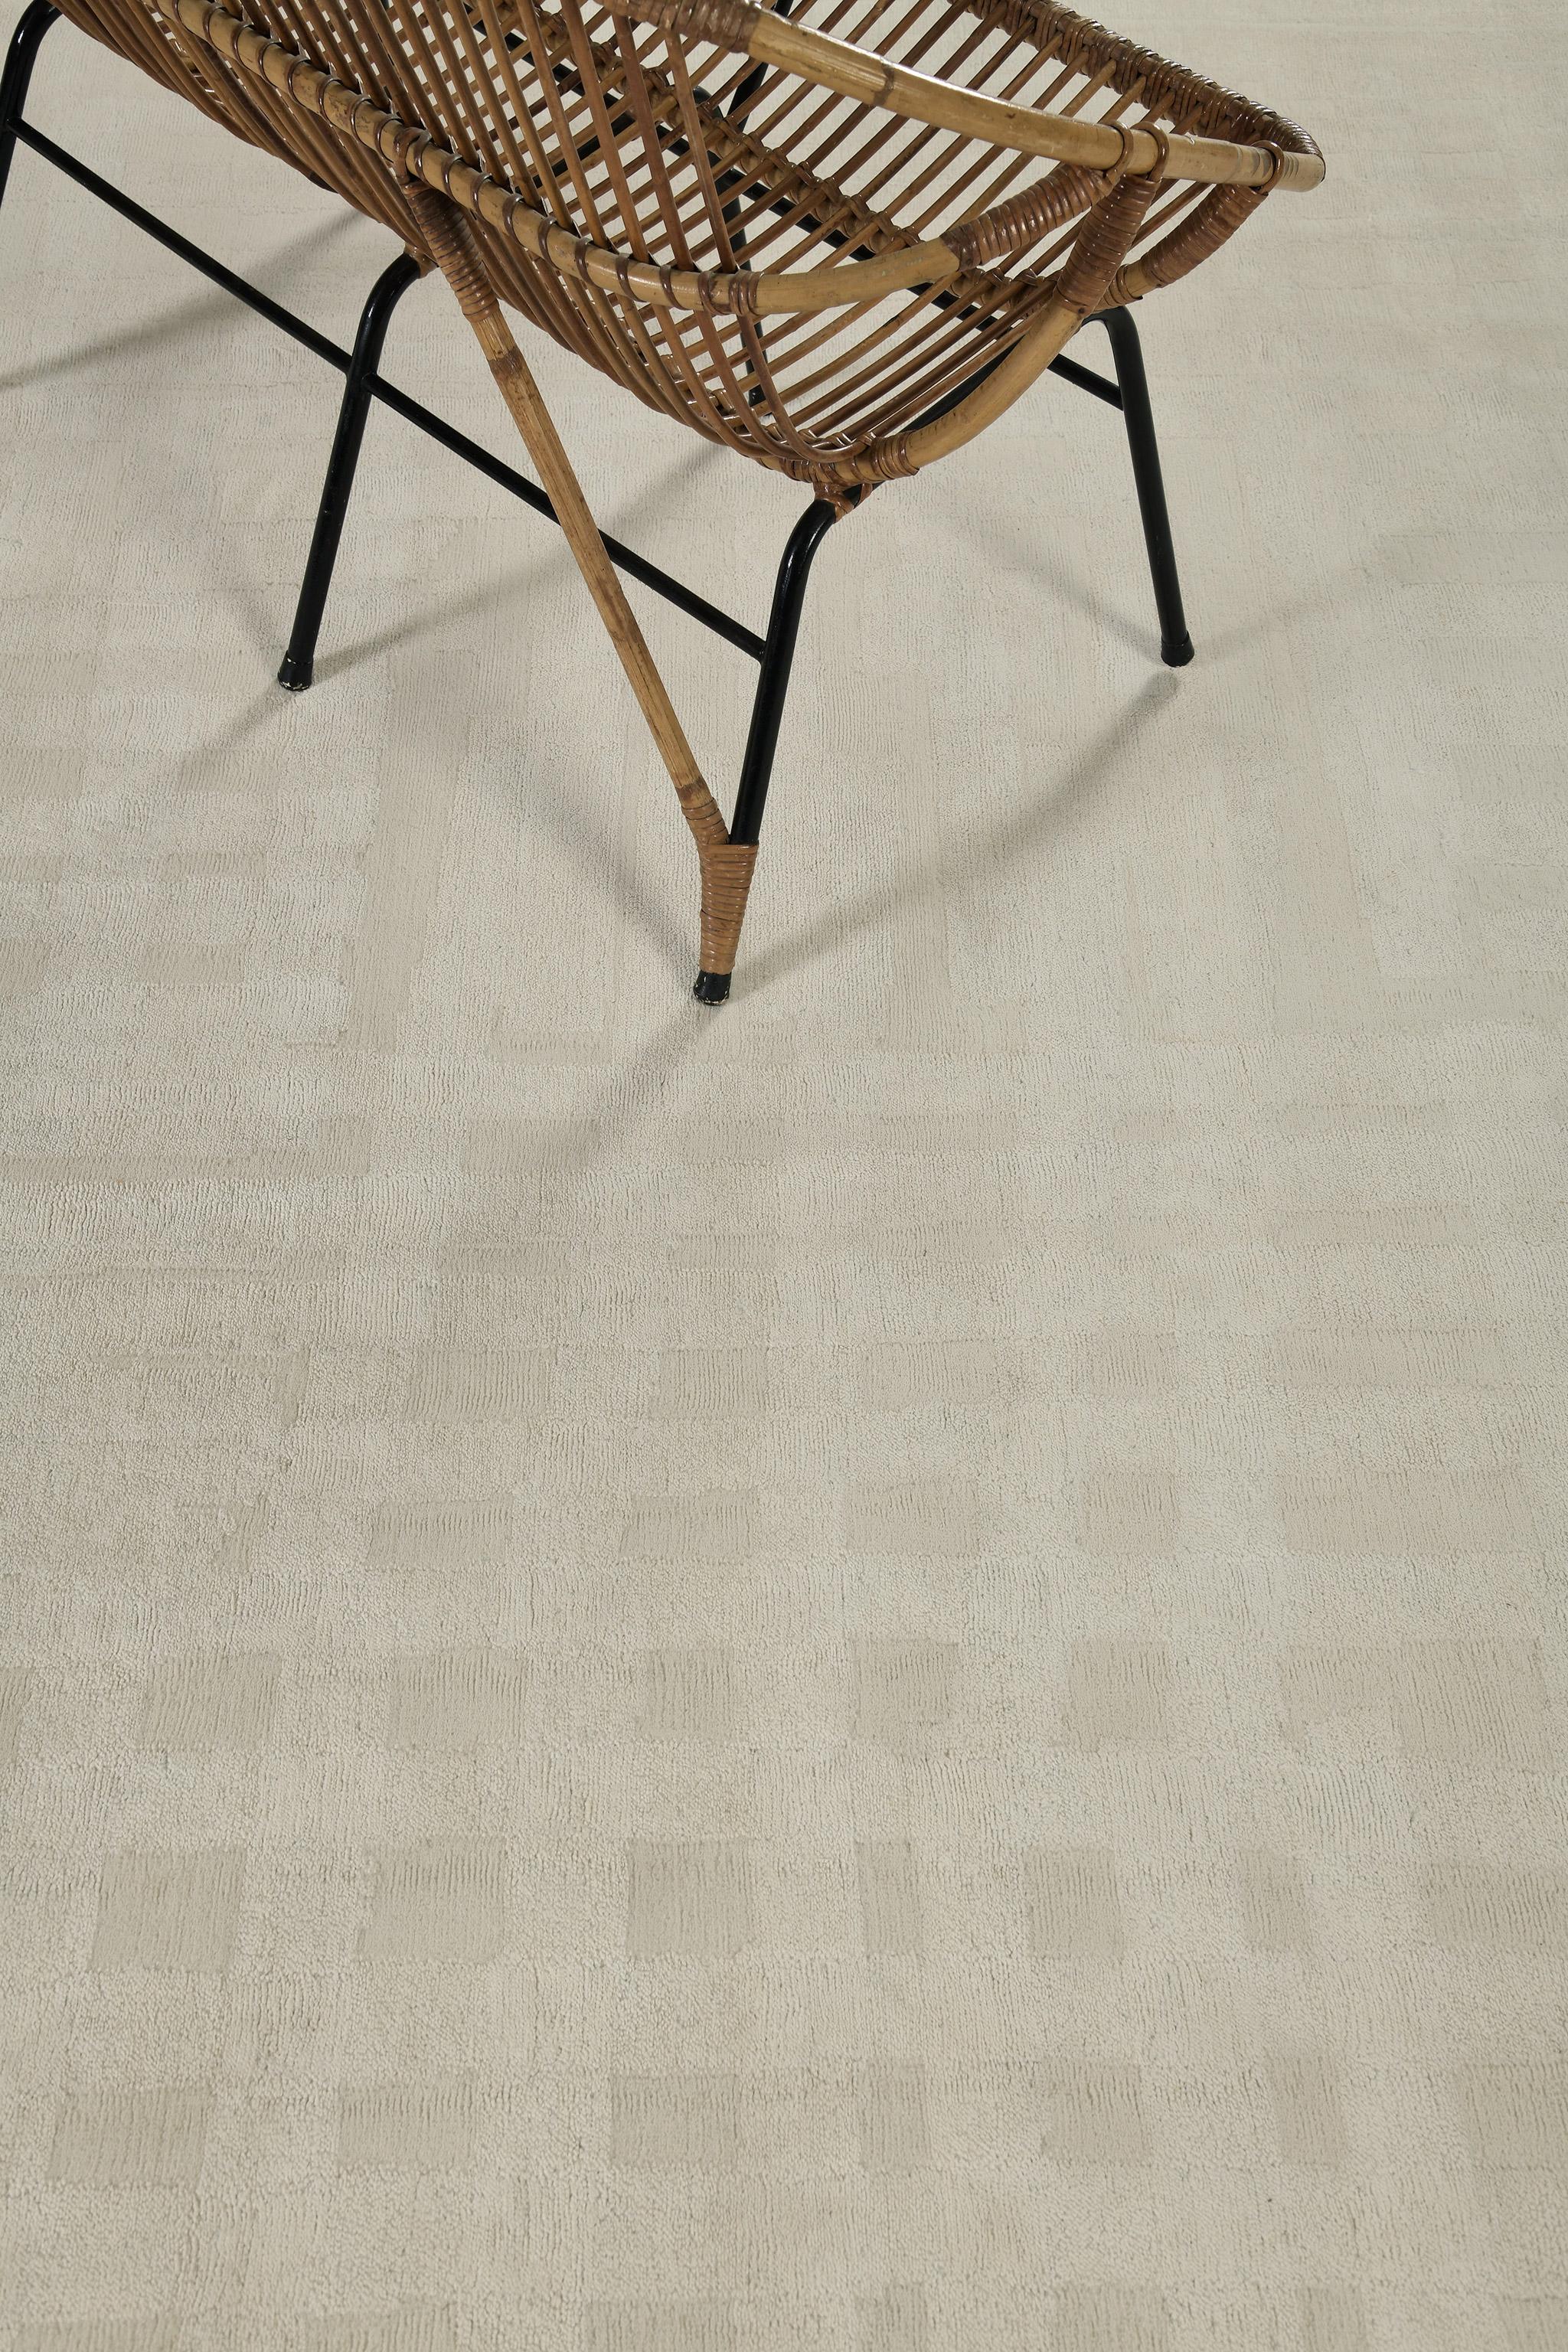 Due Volte is neutral-toned wool and silk that is inspired by various aspects of architecture. Featuring all the varying degrees of linear patterns, this stunning rug features a classy and sophisticated kind of decor. A timeless design that is